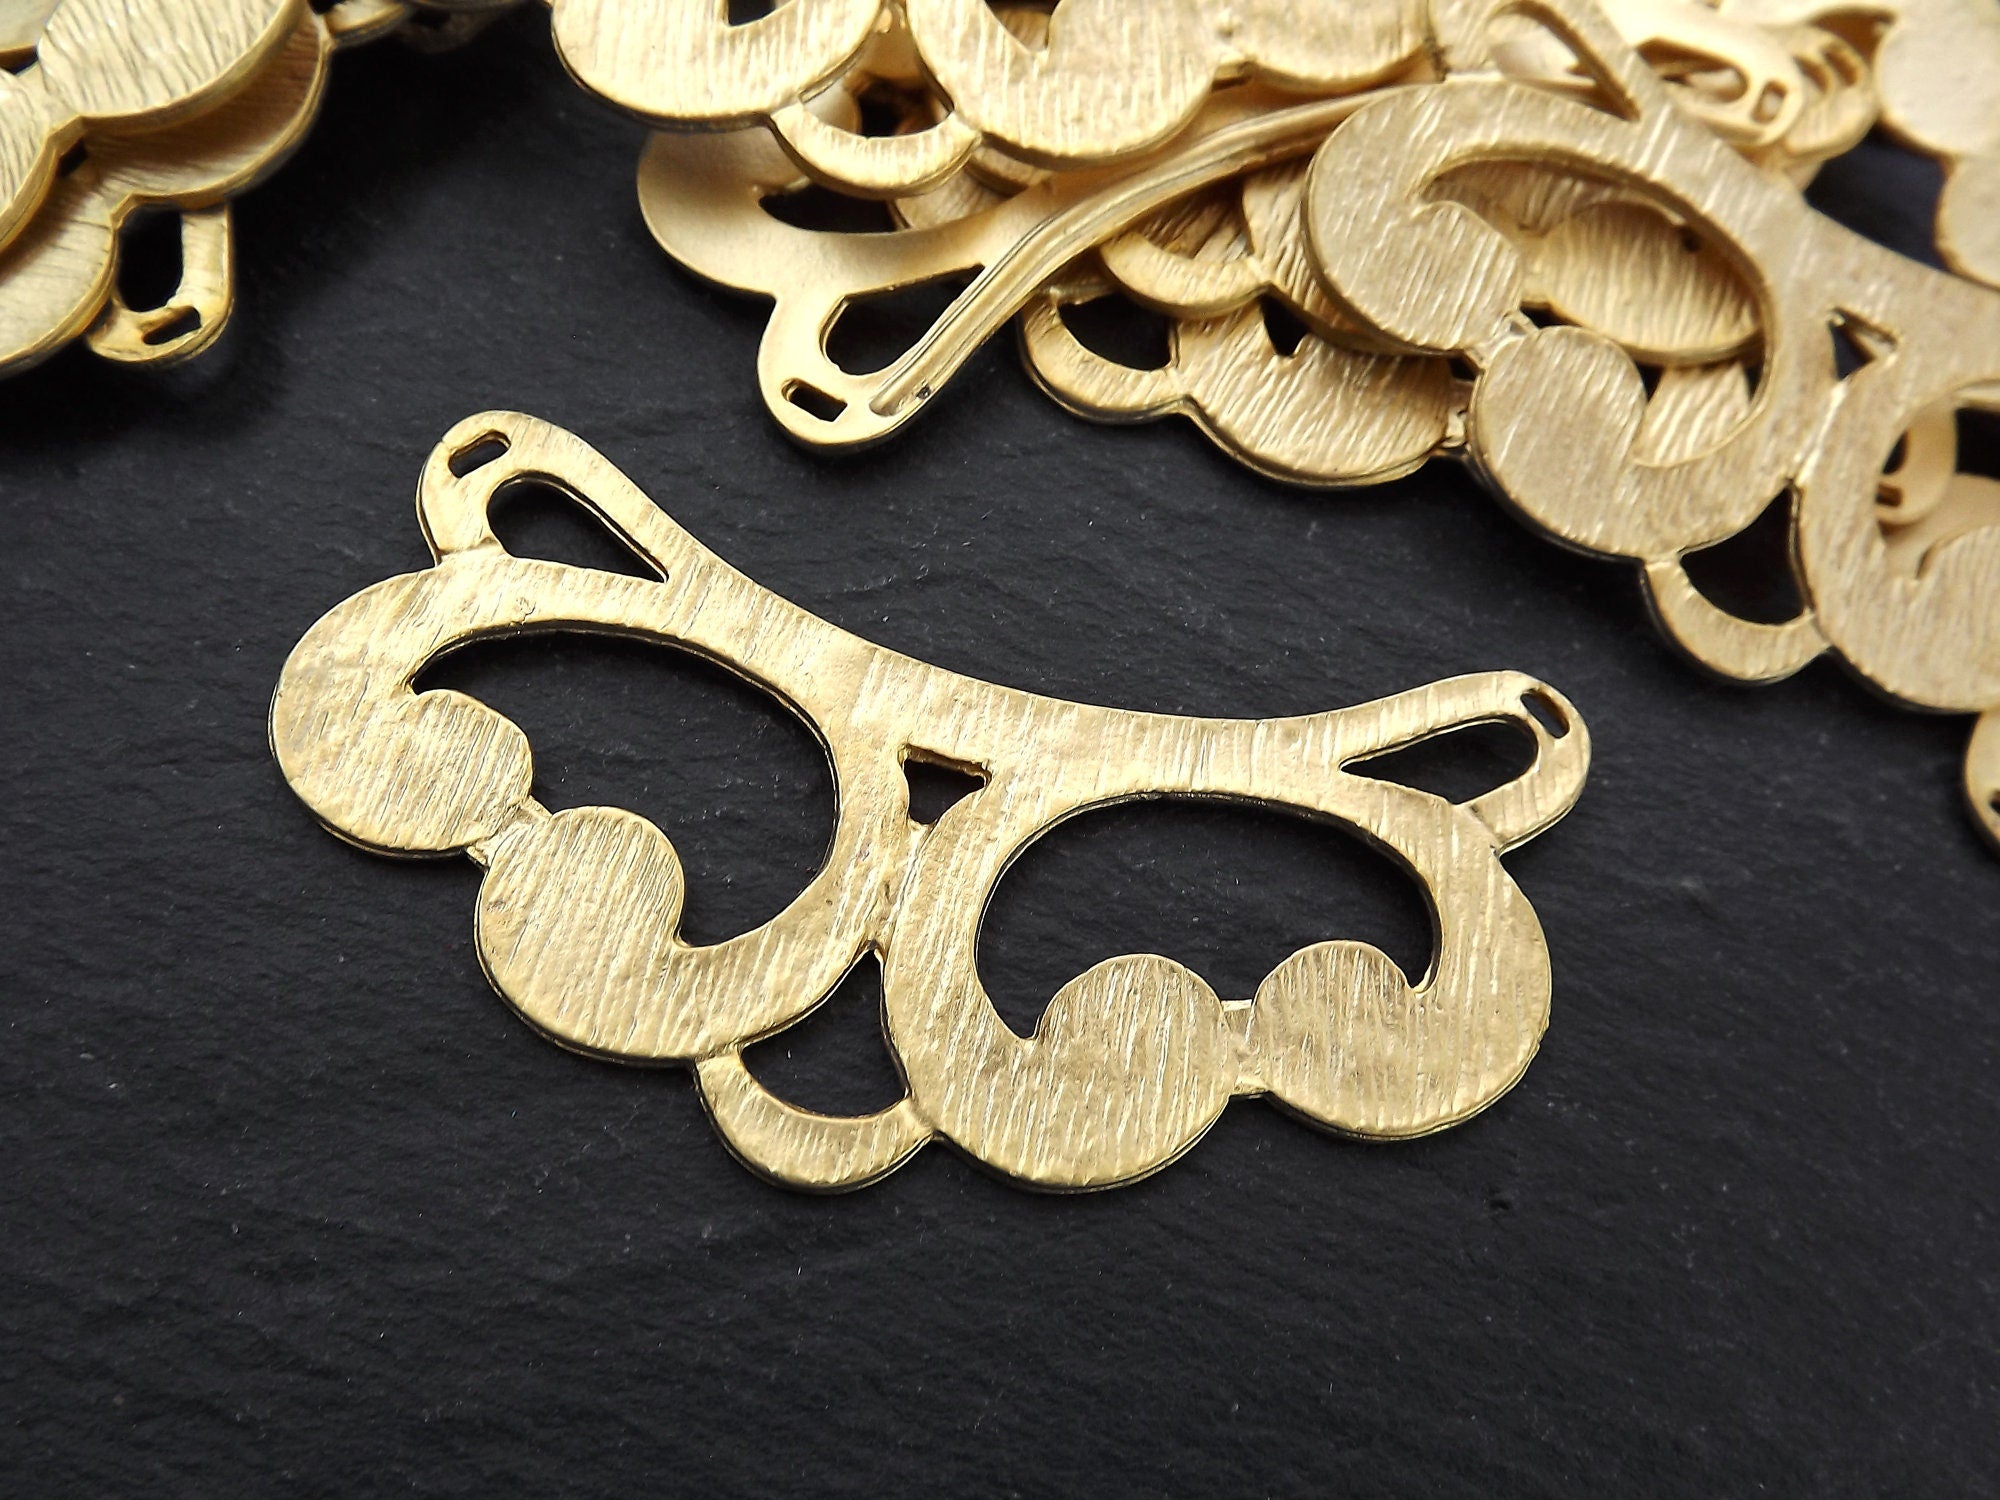 Curly Collar Pendant, Gold Collar, Baroque, Curves, Necklace Focal, Pendant Connector, Ethnic Jewelry Supplies, 22k Matte Gold, 1PC